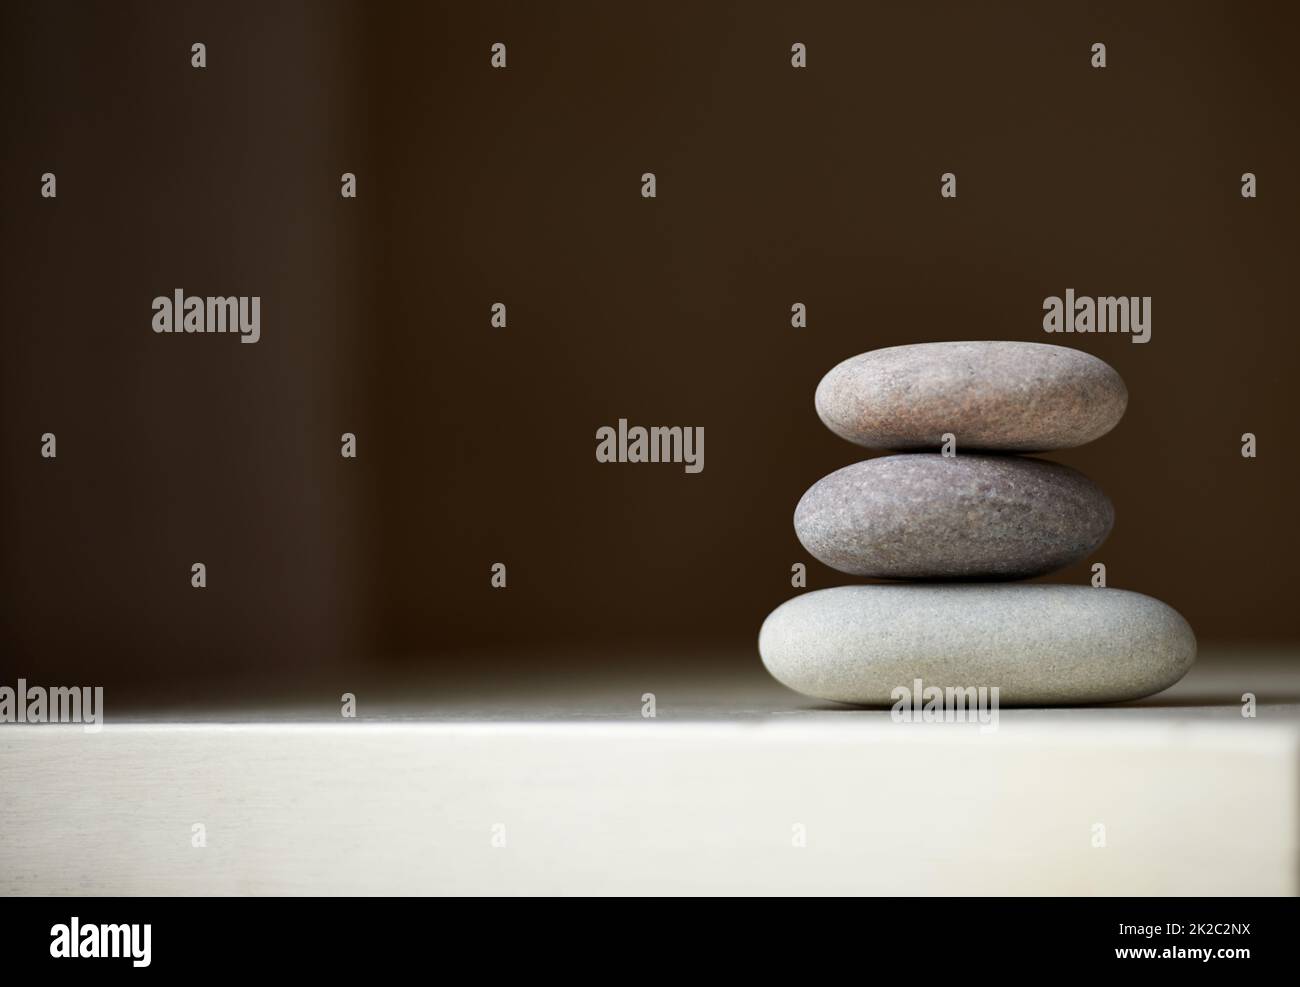 Find your balance. Three stones balanced on top of each other in natural light. Stock Photo